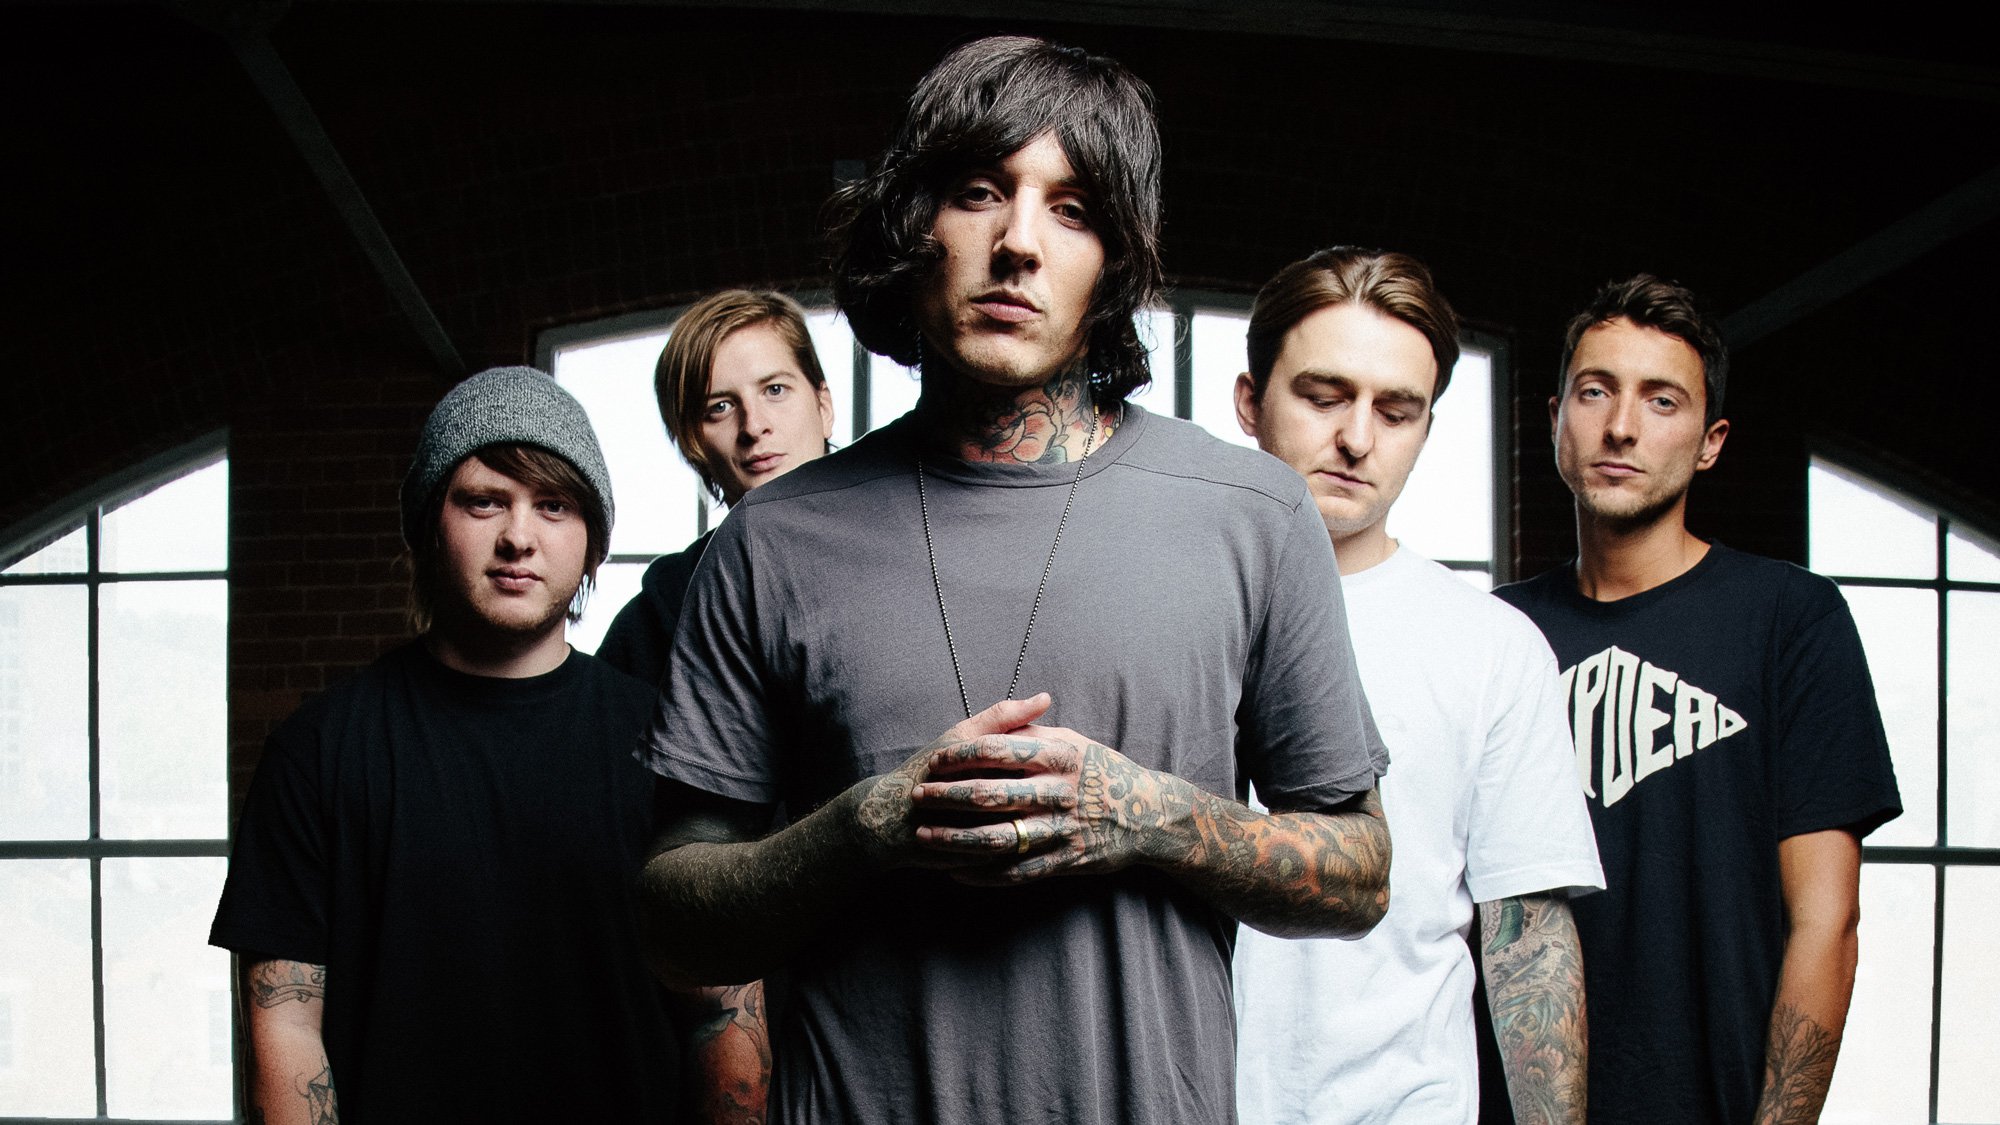 Amazing Bring Me The Horizon Pictures & Backgrounds